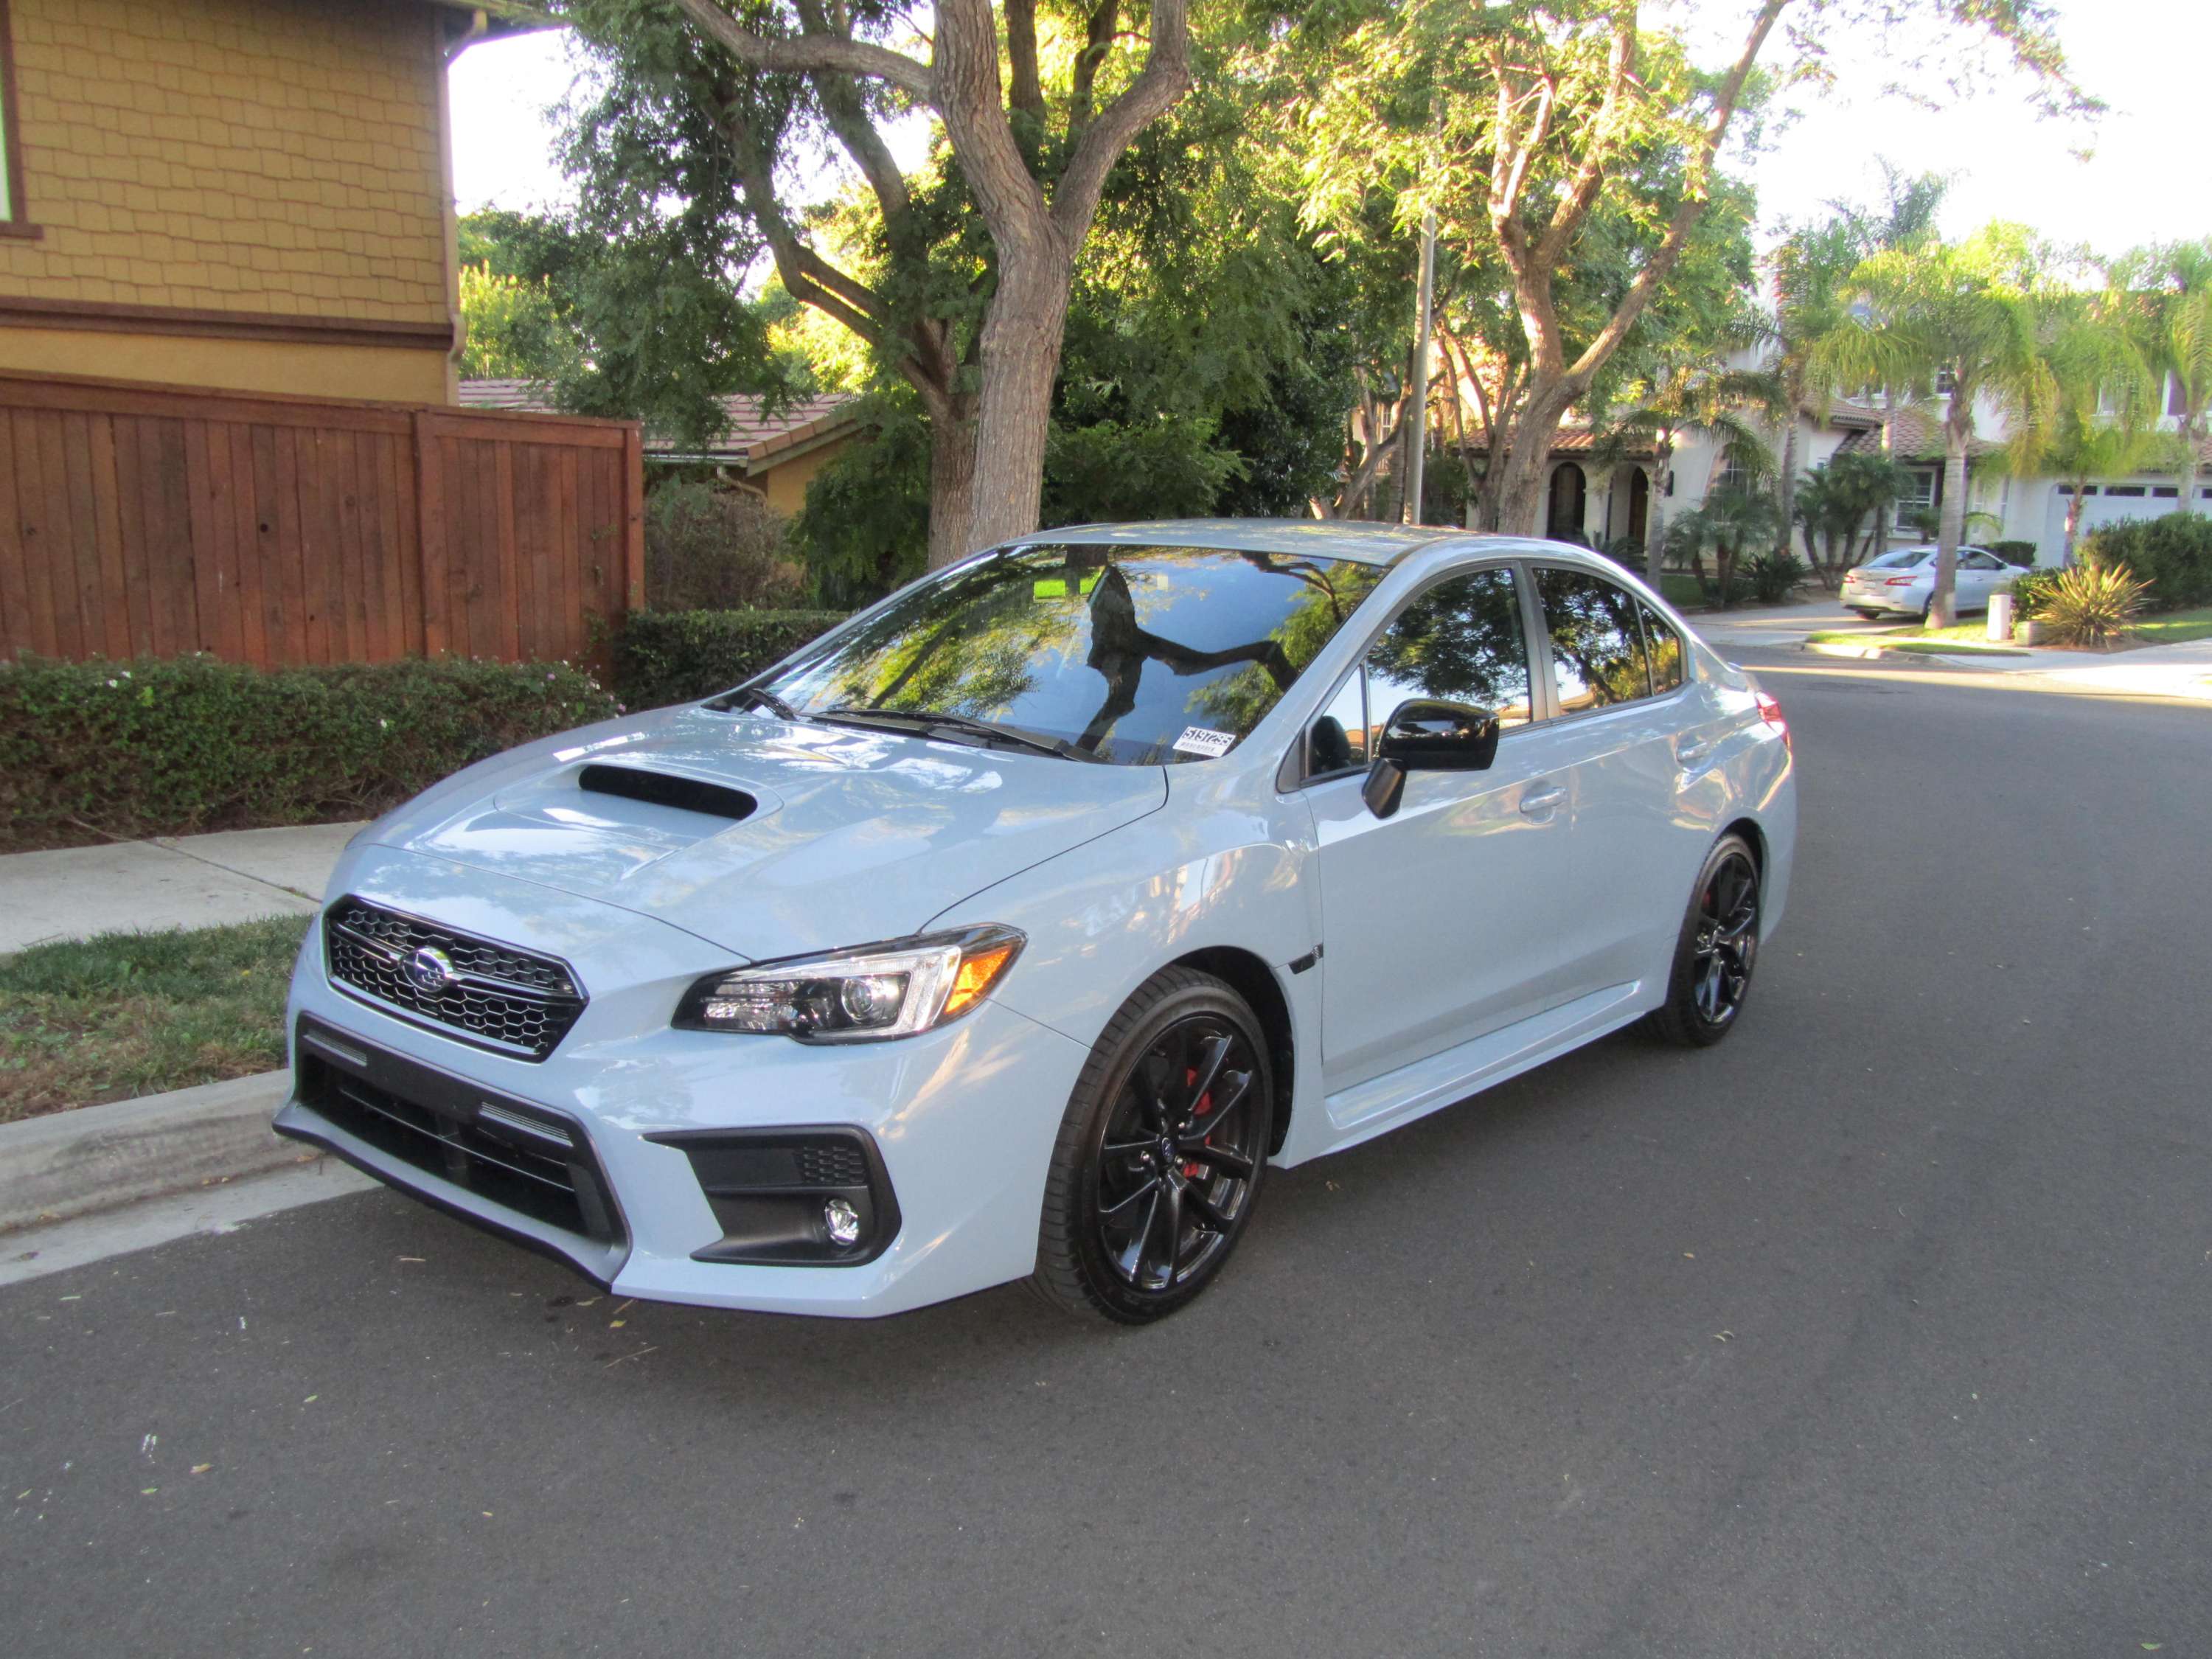 Selling my beloved B8.5 S4 Just bought a 2019 WRX Series